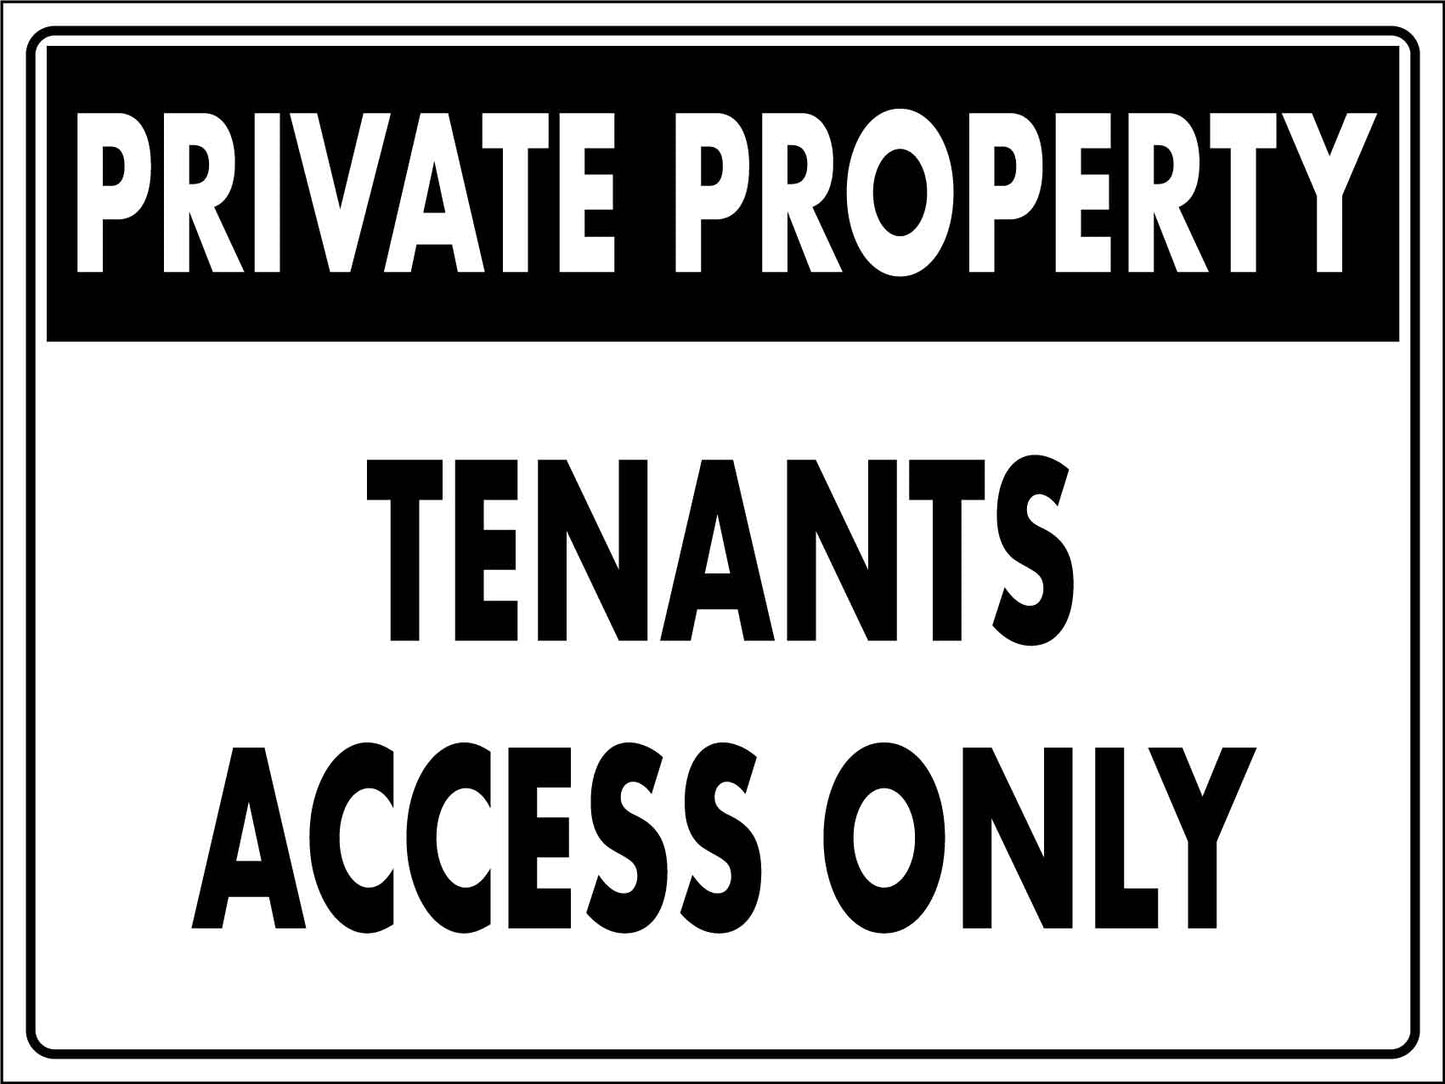 Private Property Tenants Access Only Sign